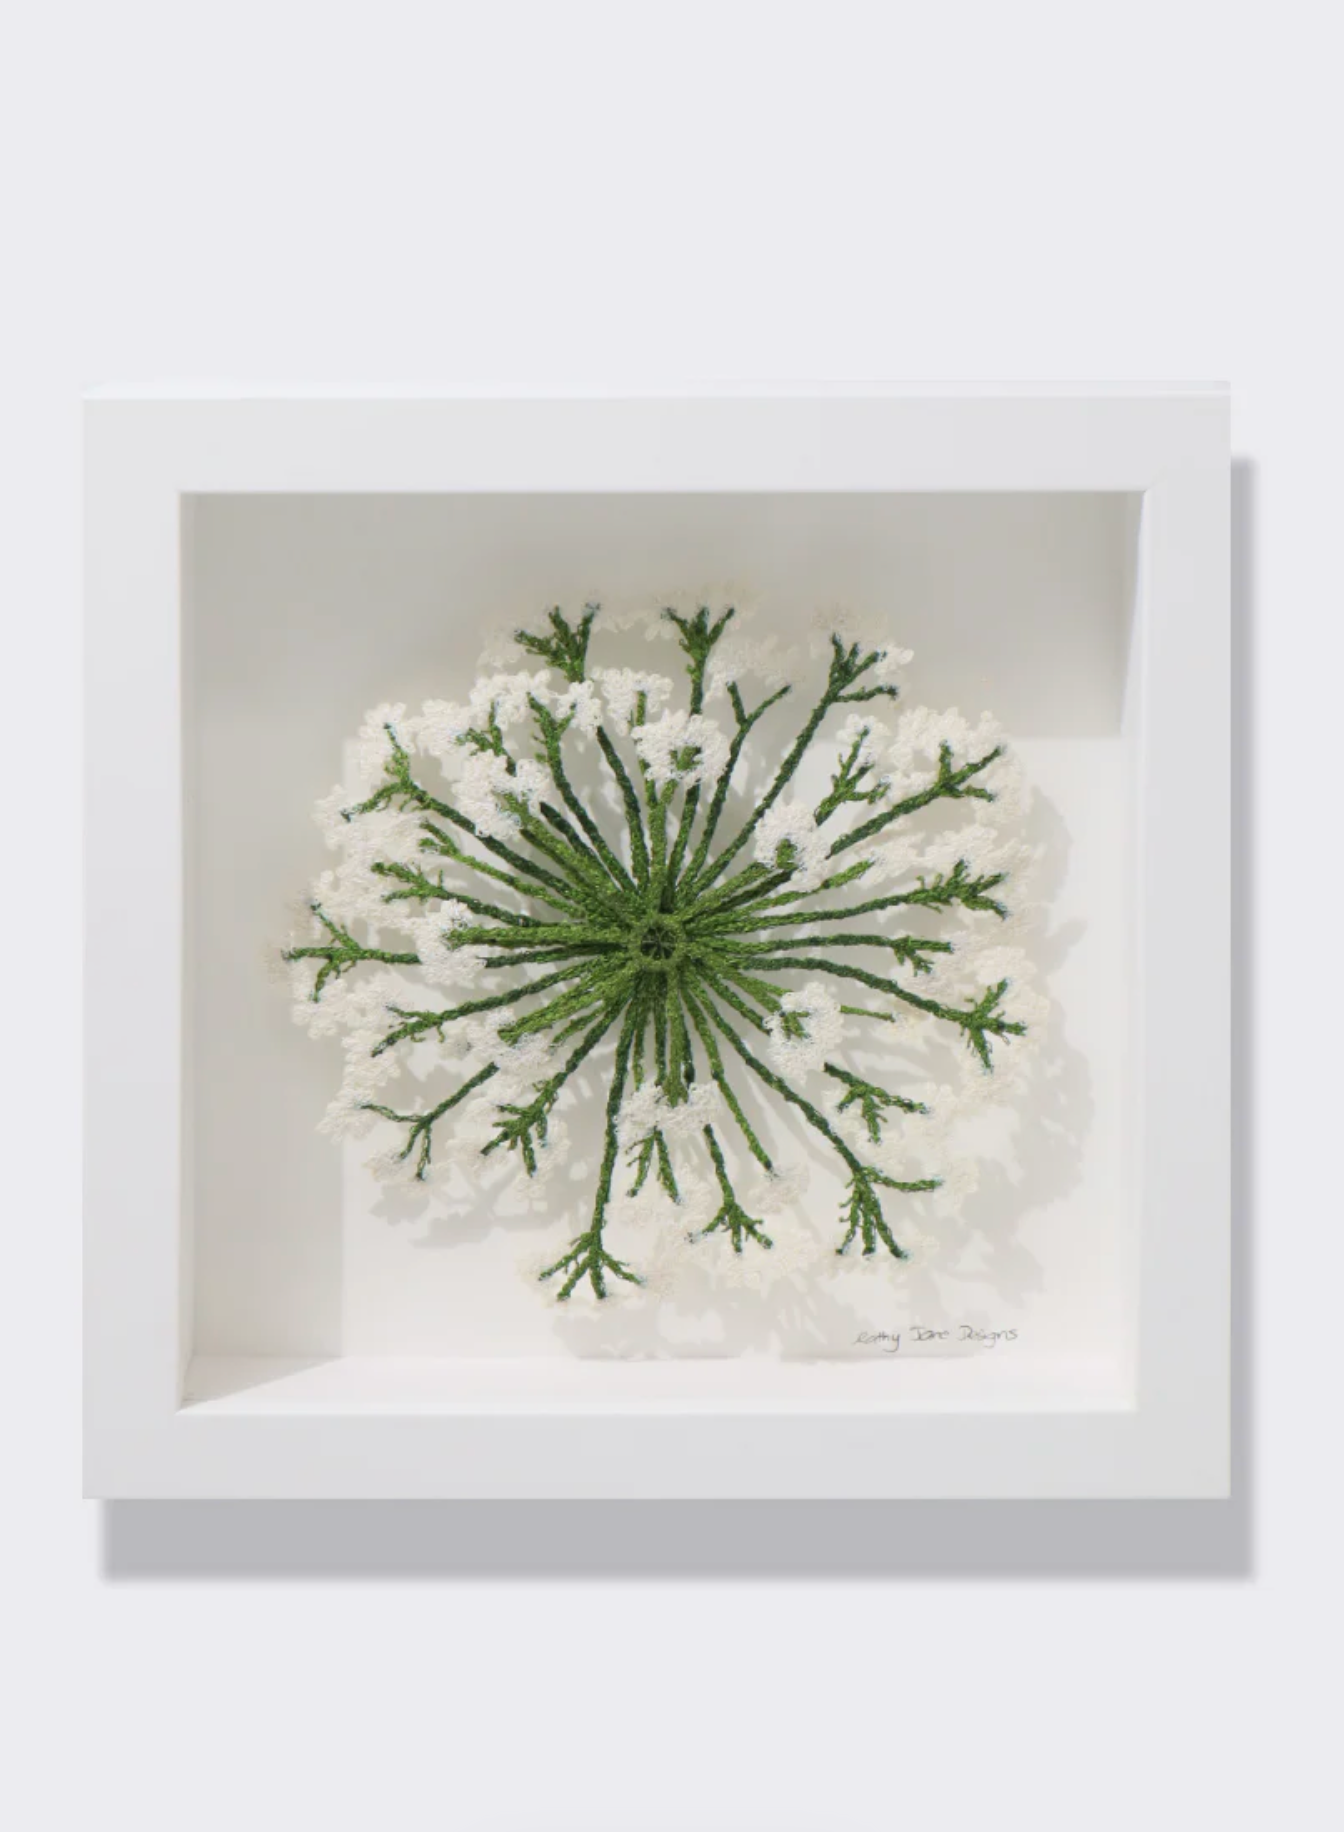 Queen Anne's lace sculptural embroidery